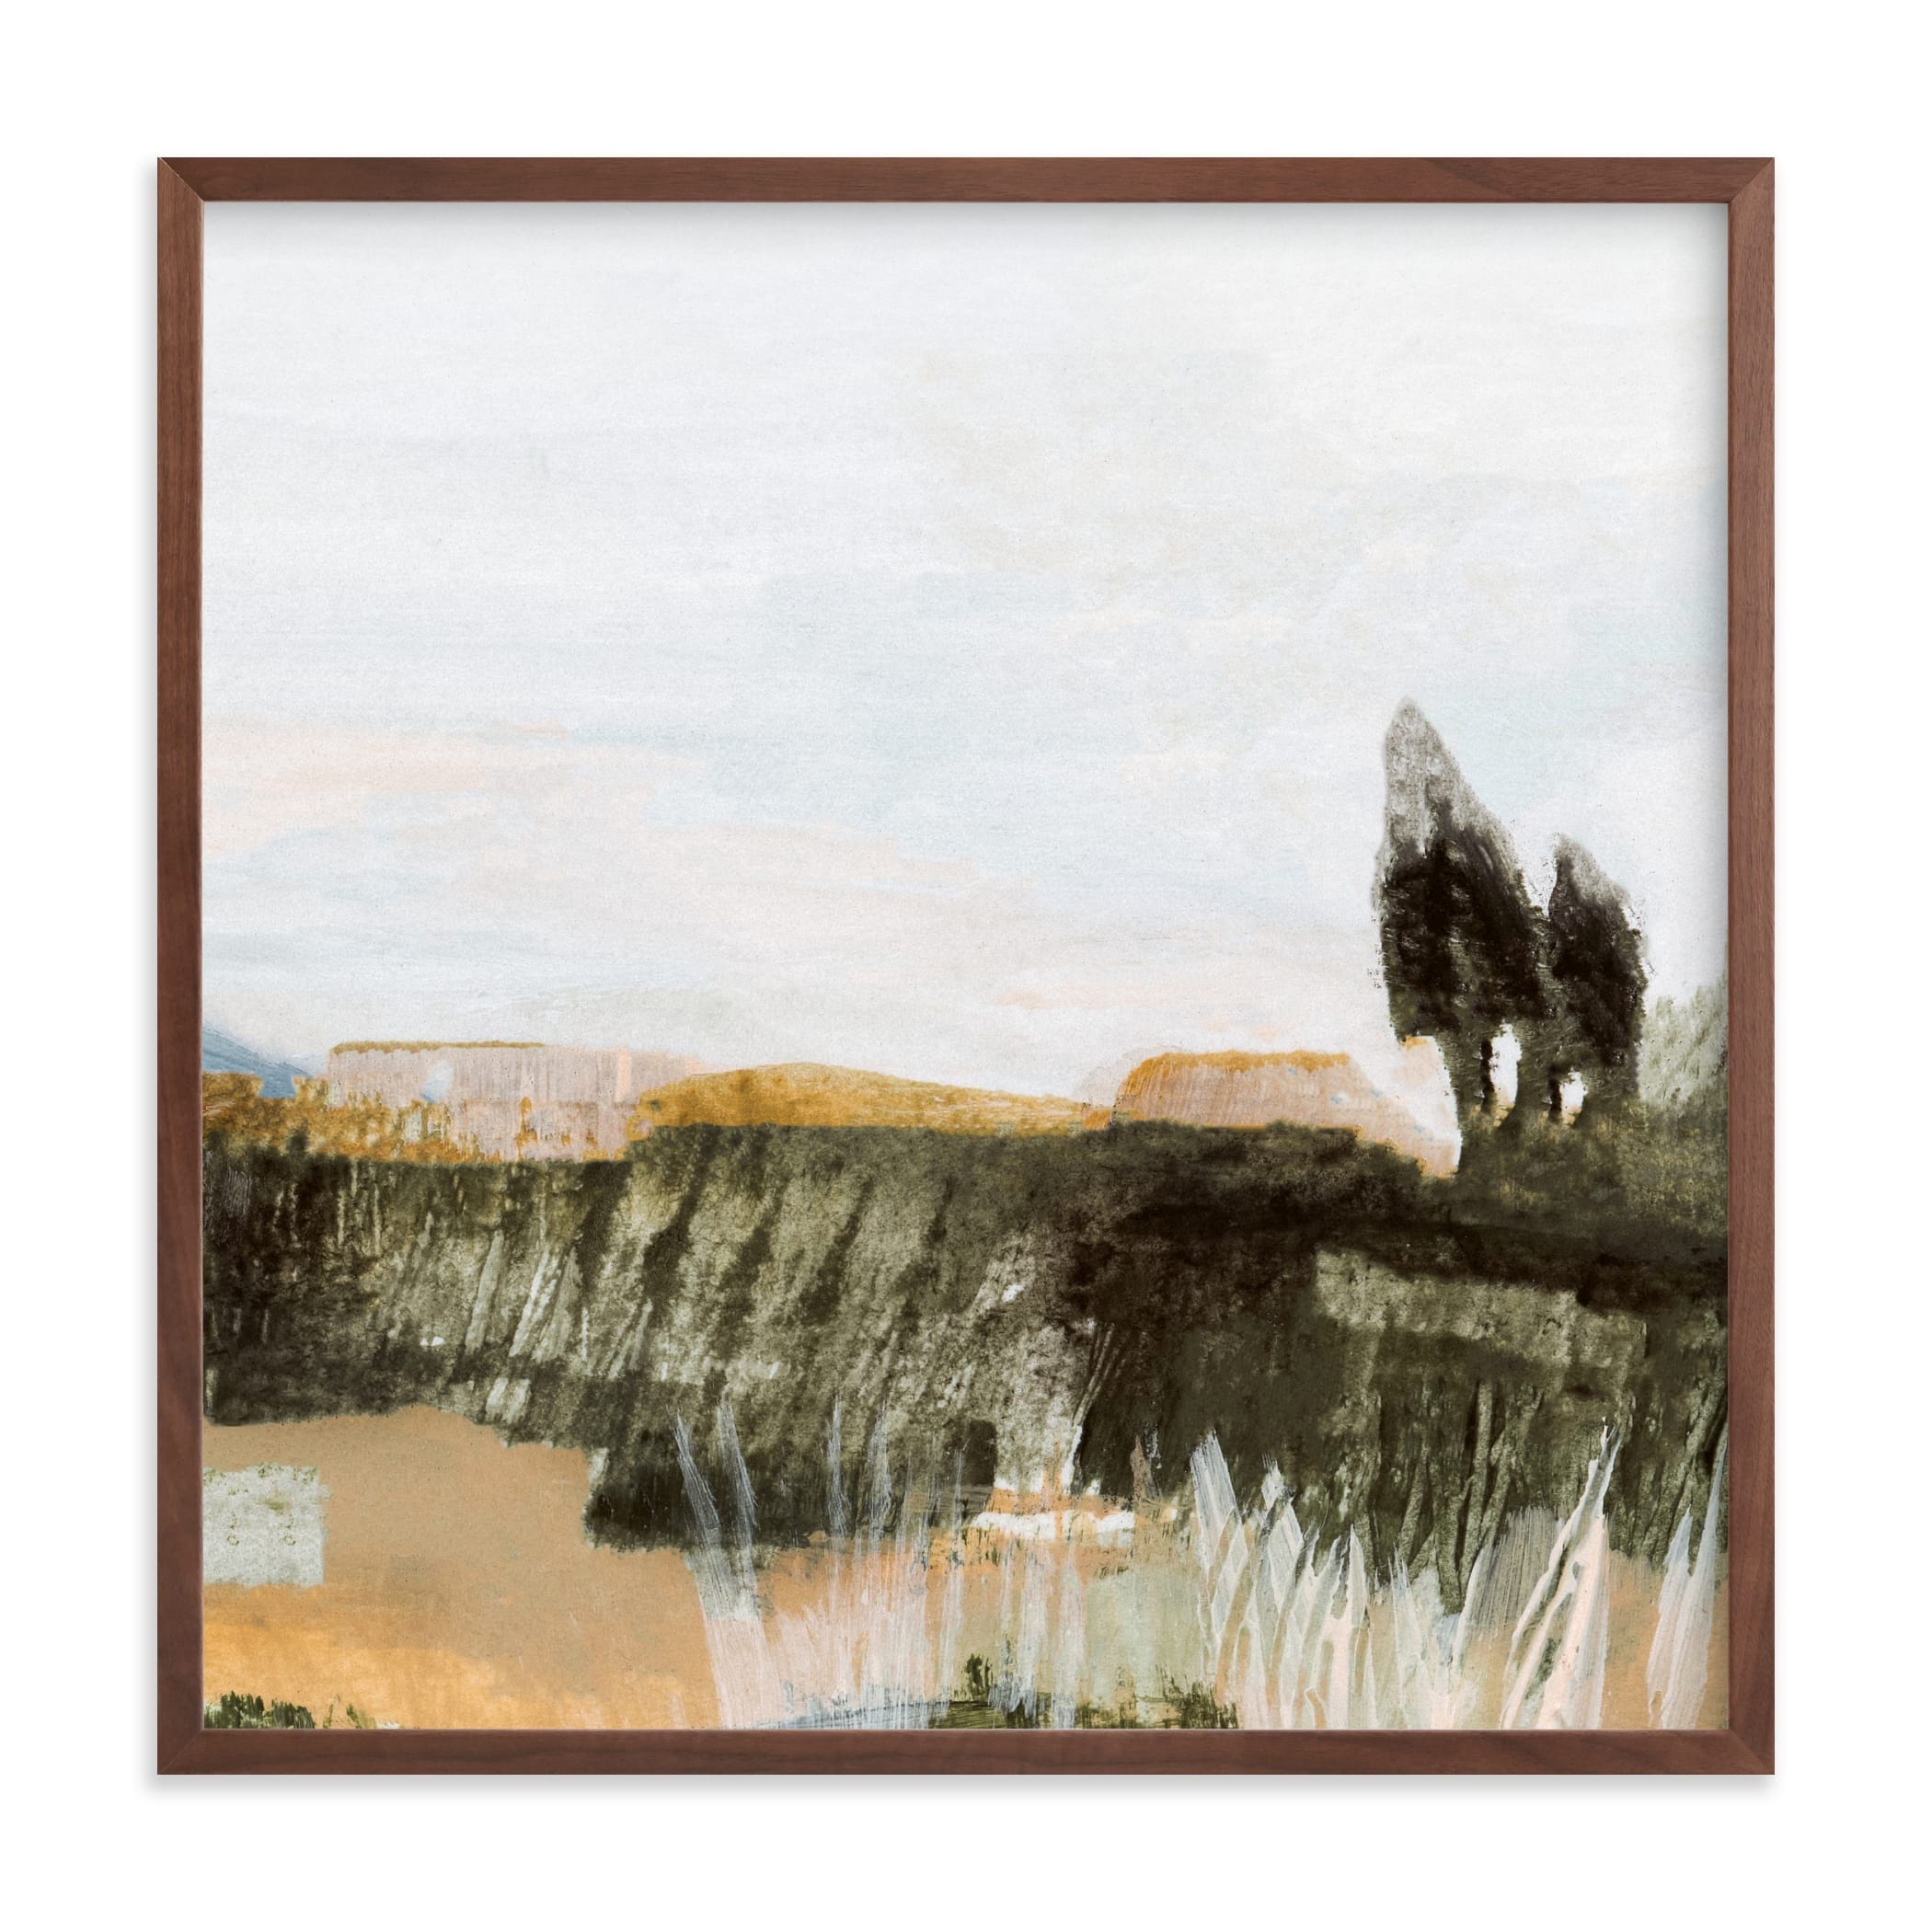 Hudson (Triptych) III Limited Edition Art Print - Image 0